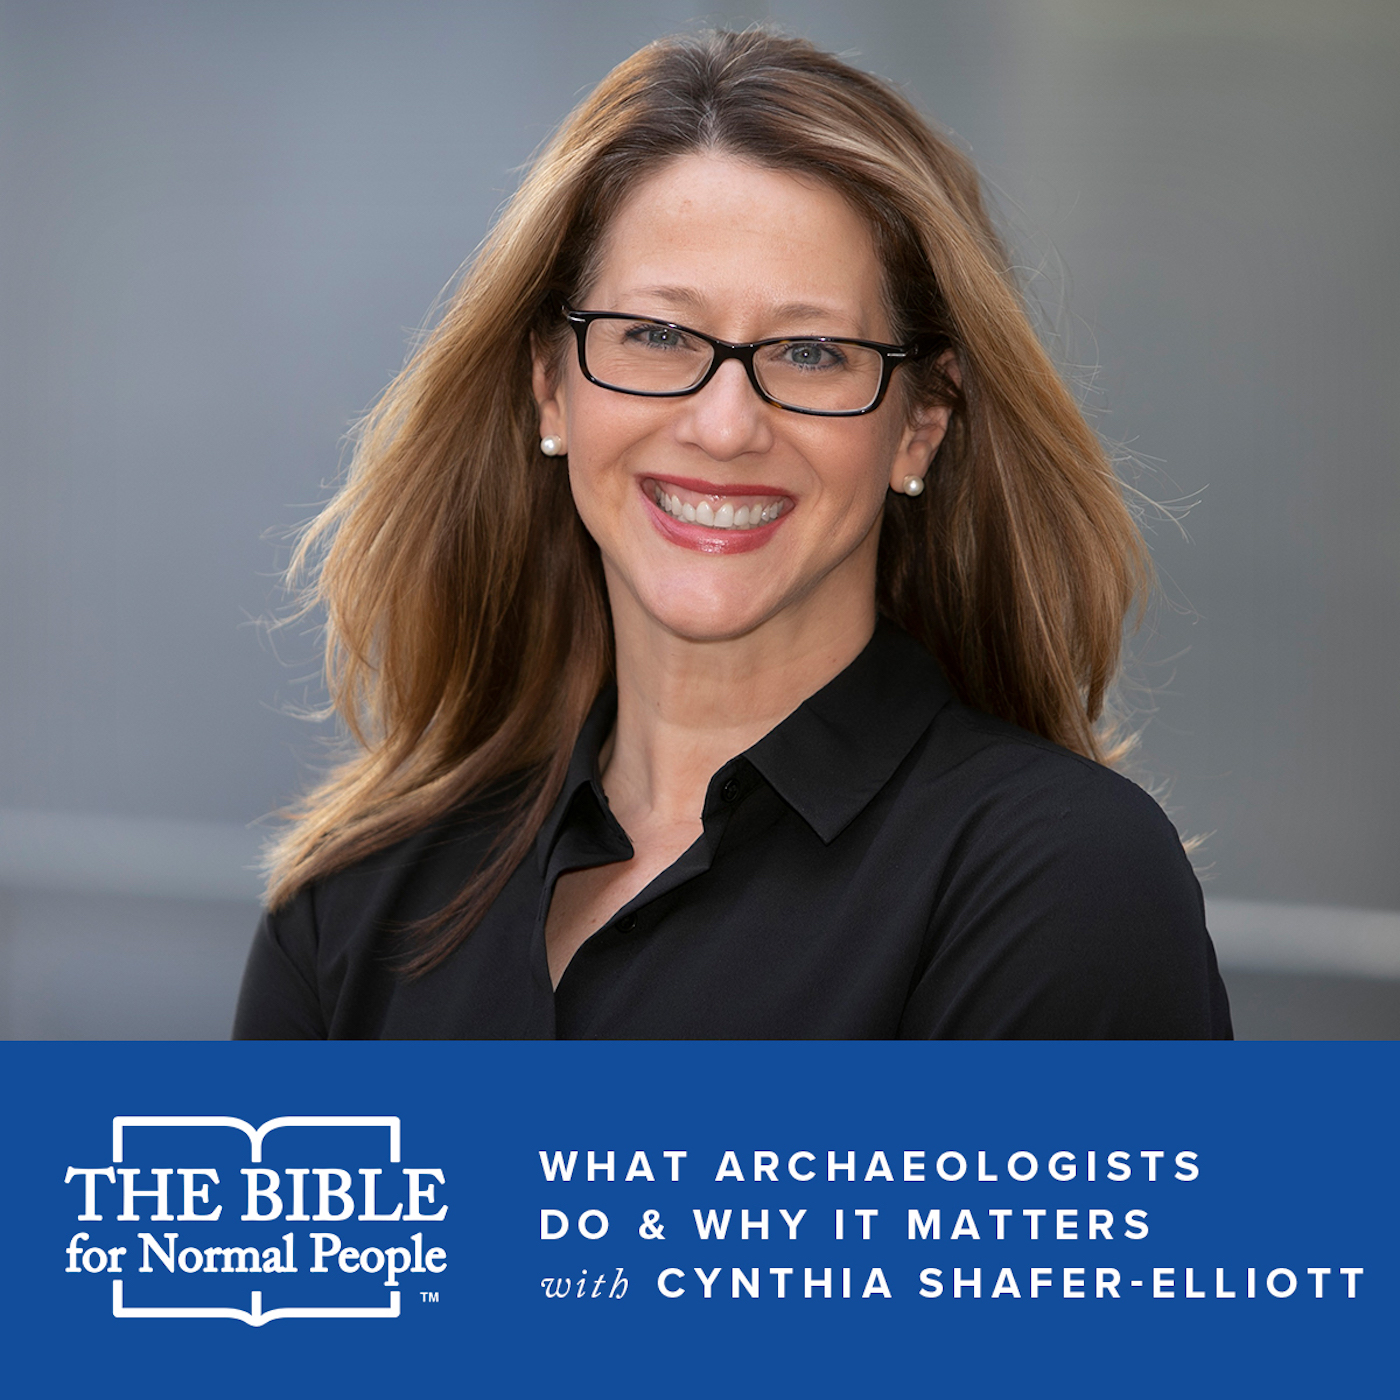 Interview with Cynthia Shafer-Elliott: What Archaeologists Do & Why It Matters (Reissue)